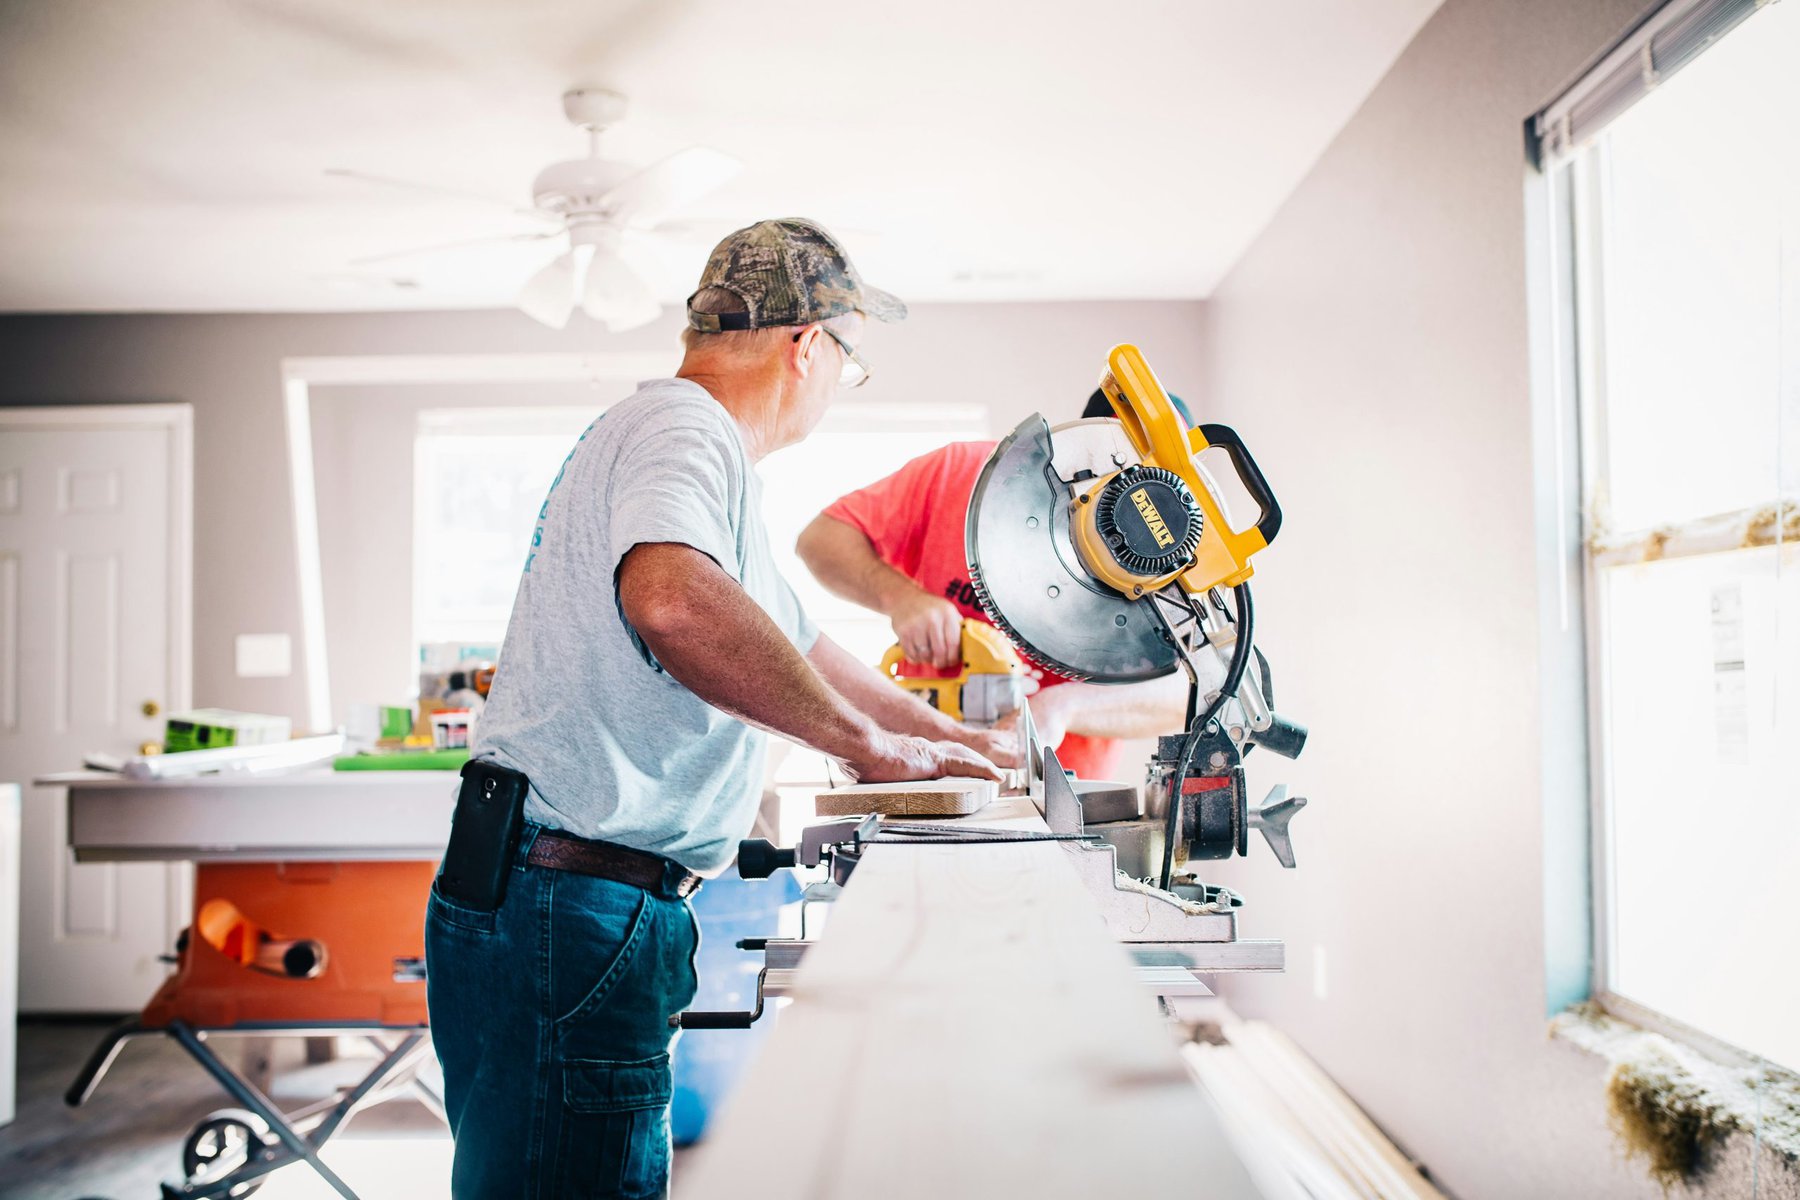 DIY Home Renovations: Tips For Homeowners On A Budget